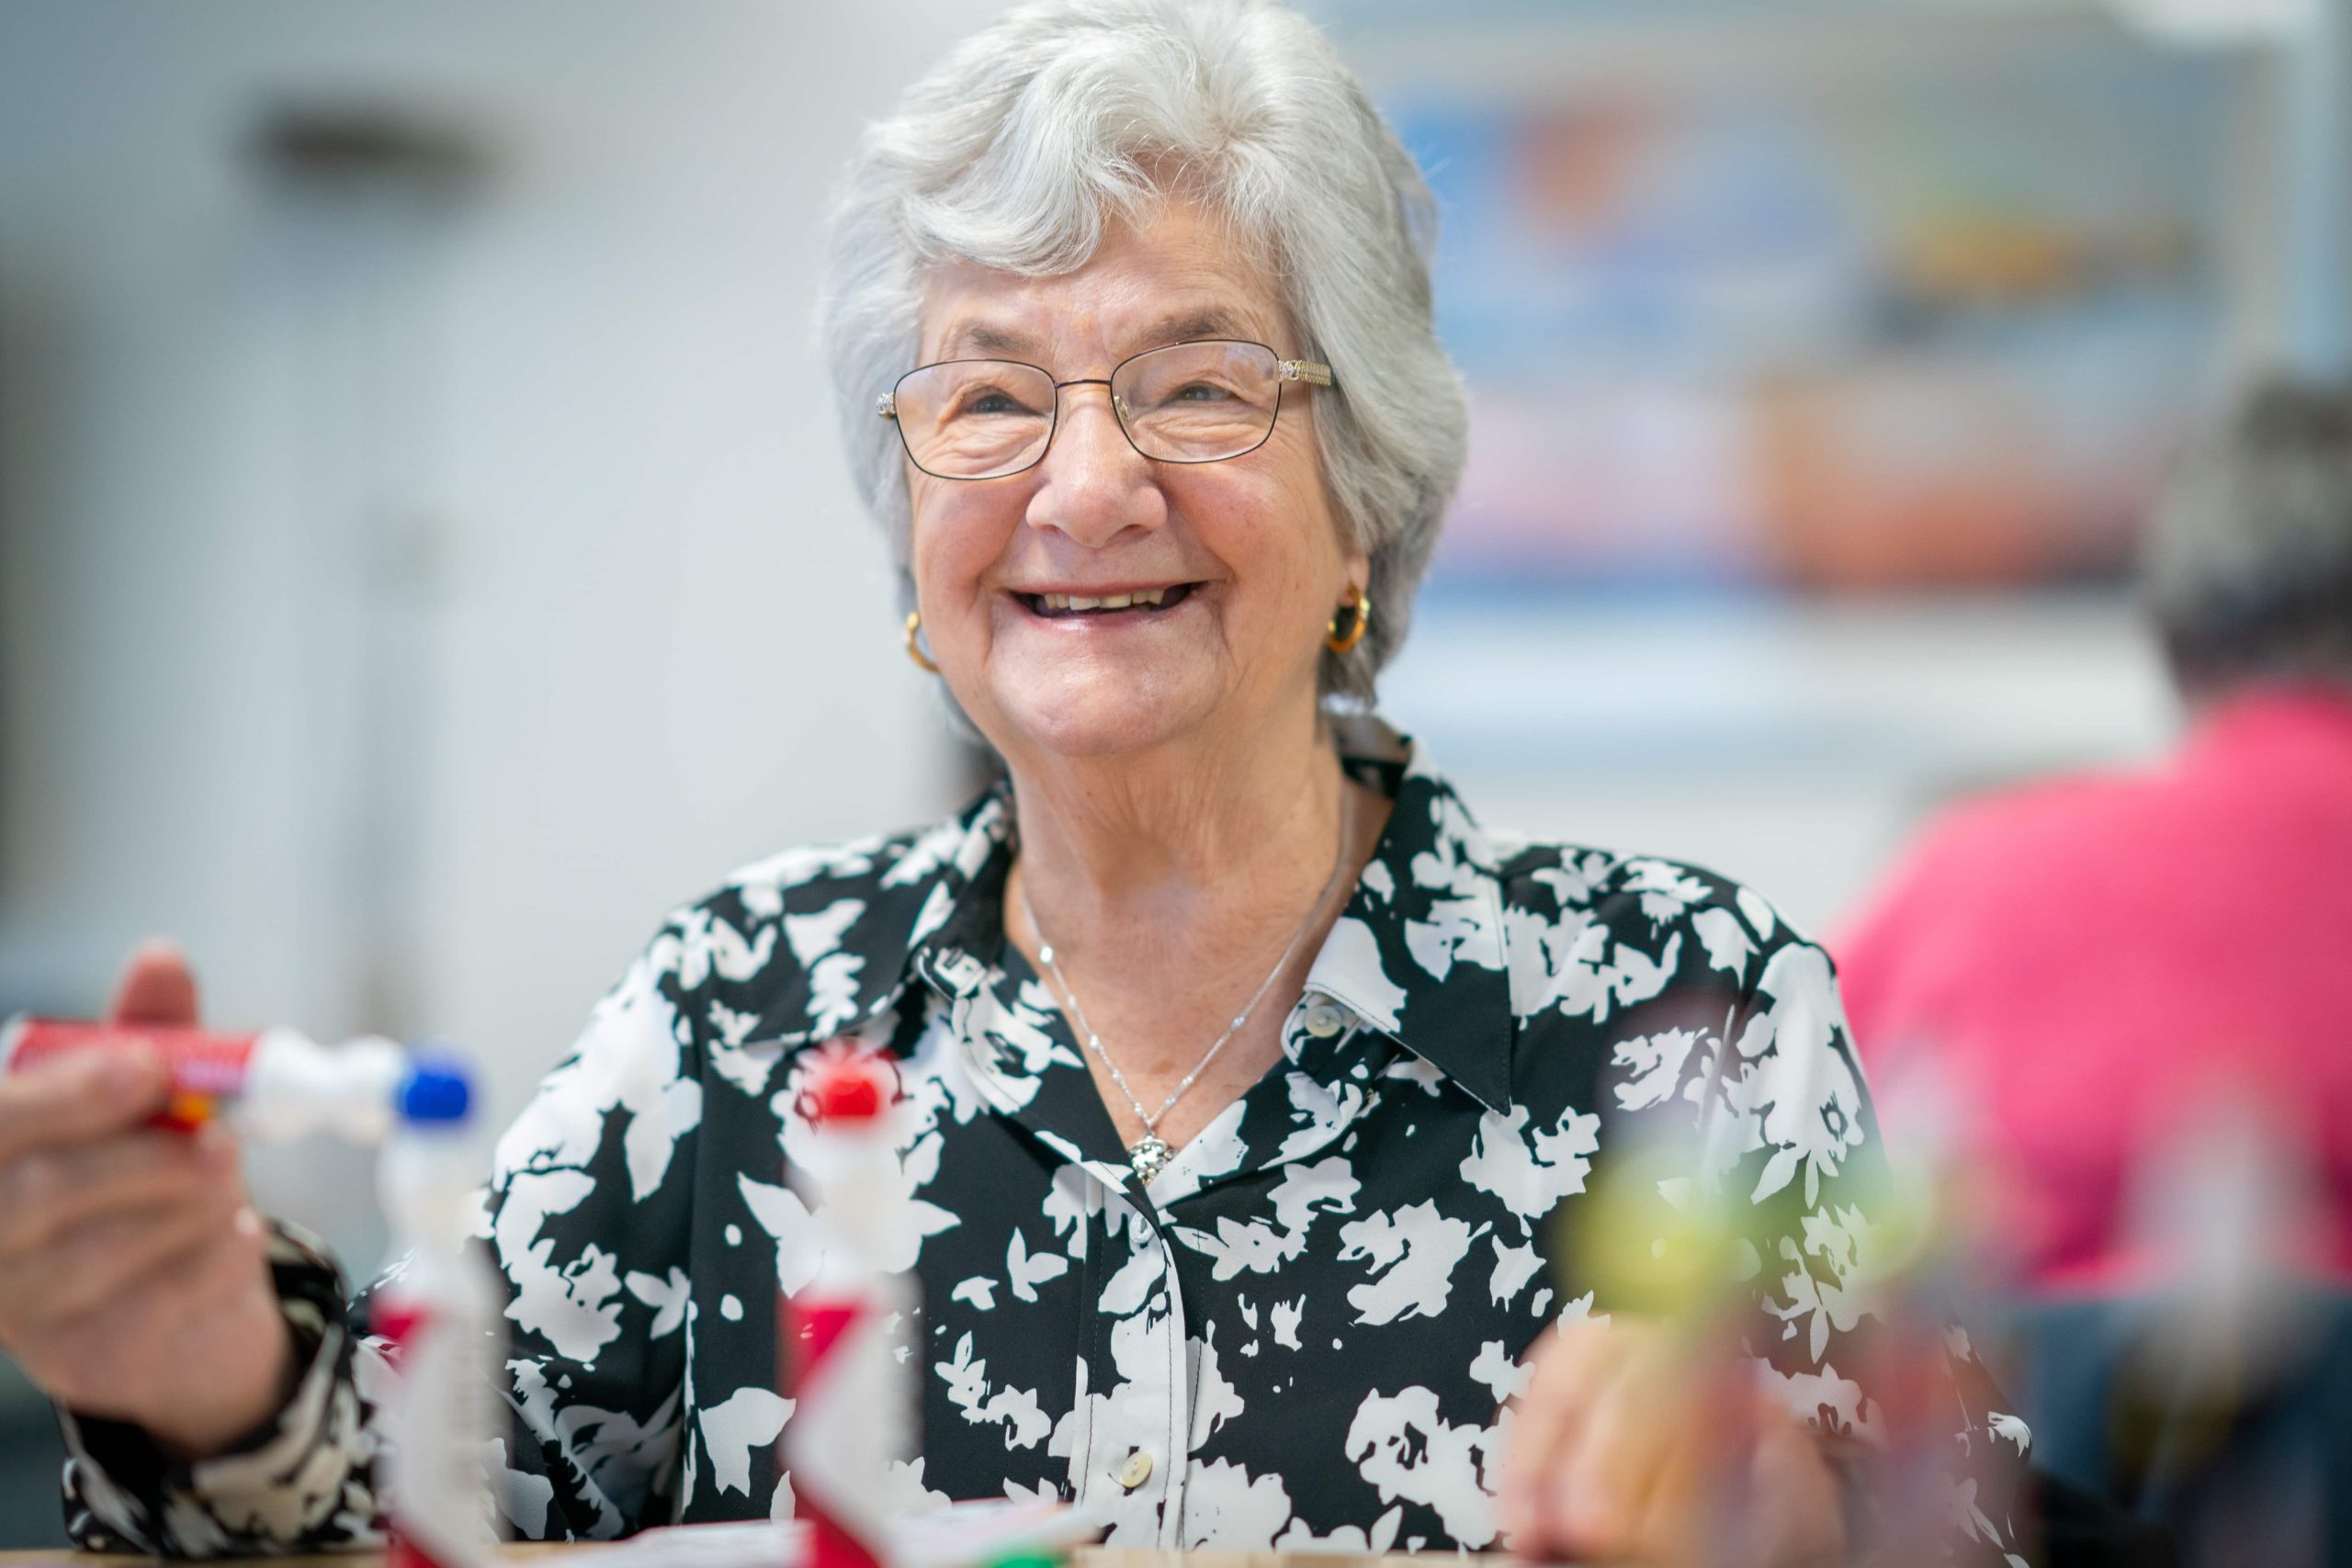 Trivallis Housing Landlord Wales An elderly woman with gray hair and glasses smiling while in a Trivallis housing room, with blurred figures in the background.